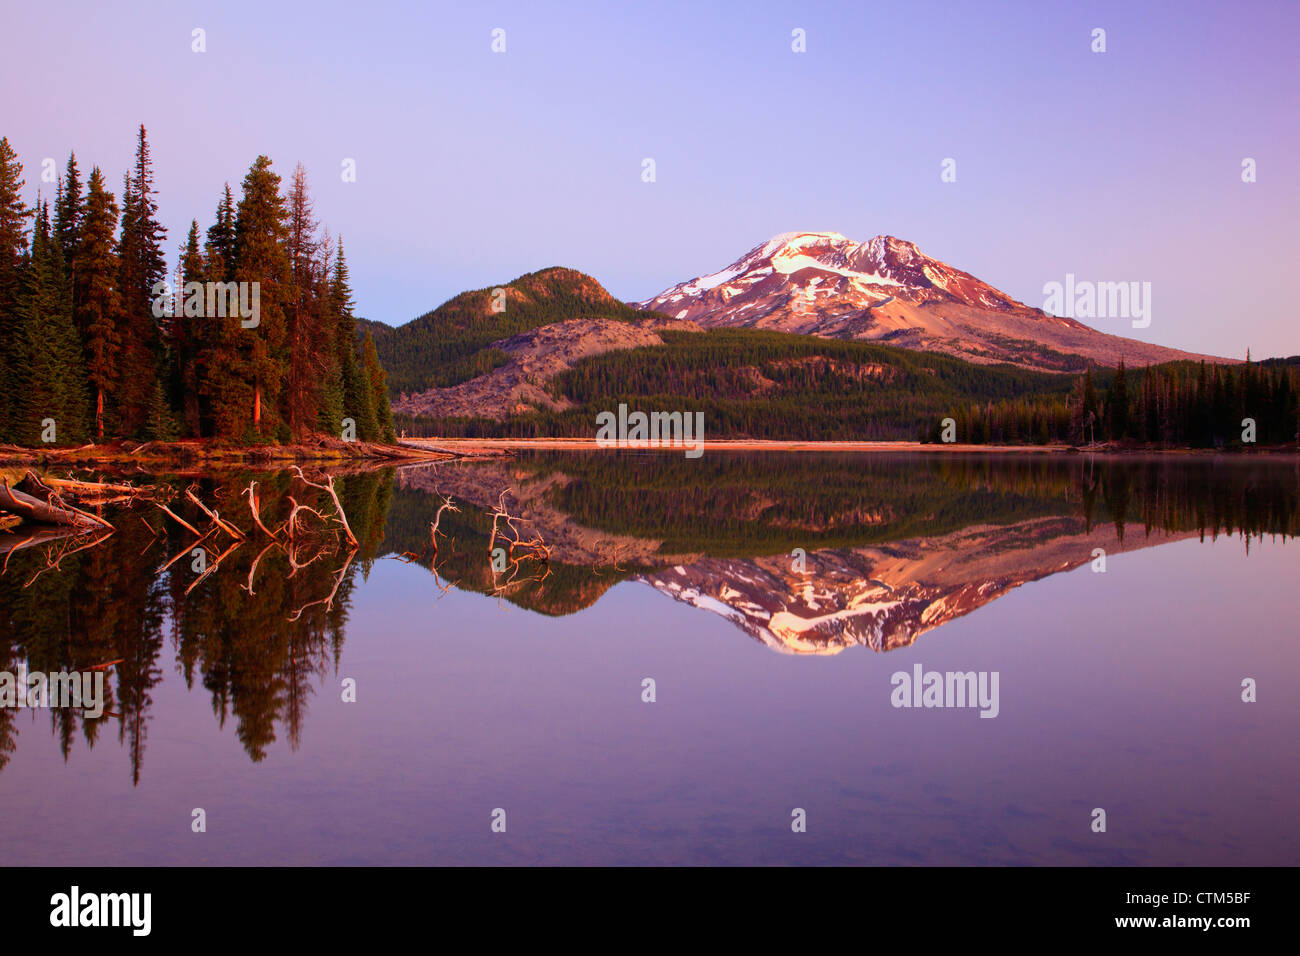 Sunrise Over Sparks Lake And South Sister In The Three Sisters Wilderness; Oregon, United States of America Stock Photo